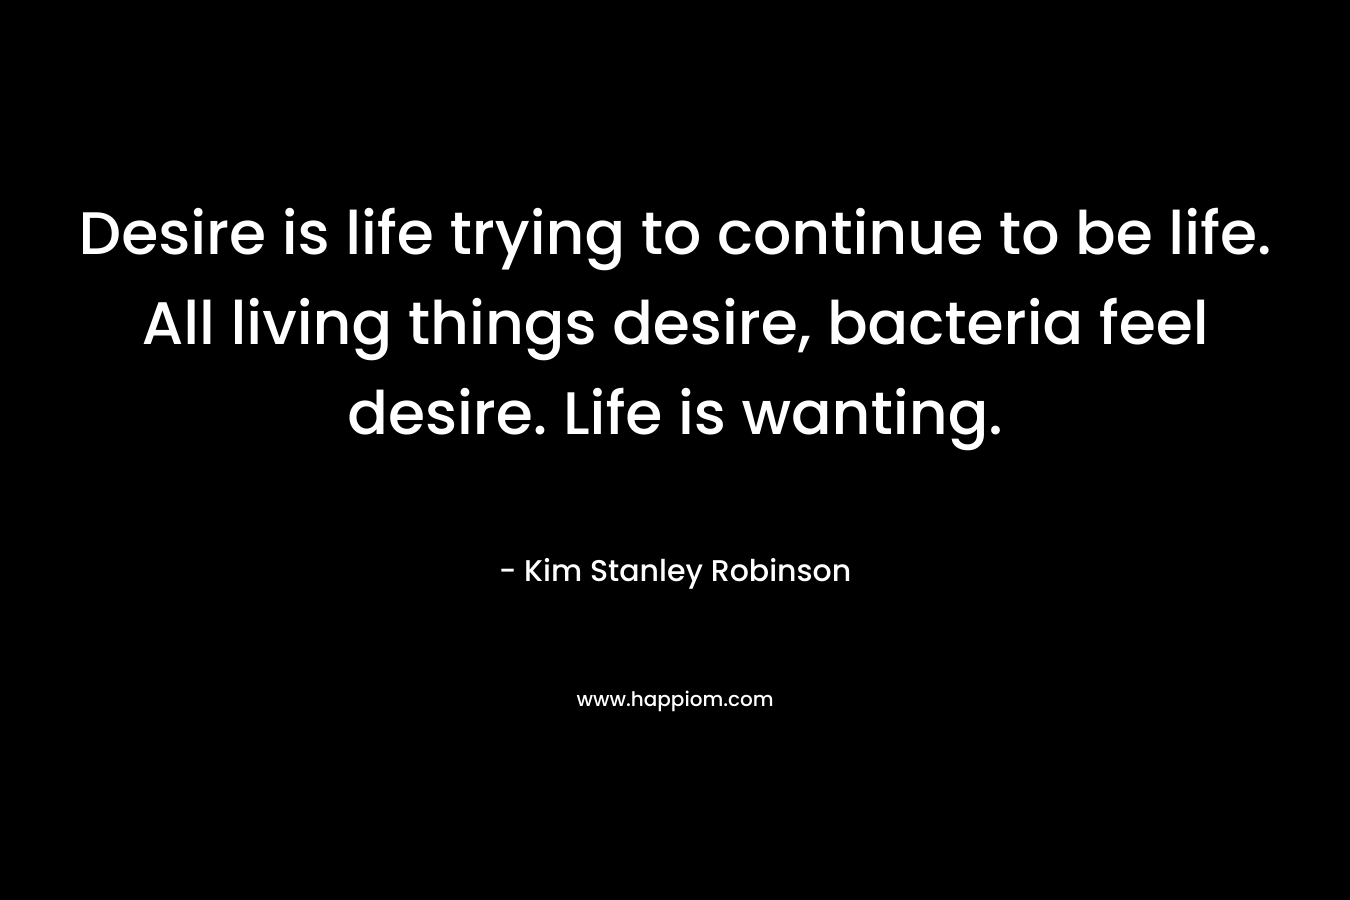 Desire is life trying to continue to be life. All living things desire, bacteria feel desire. Life is wanting.